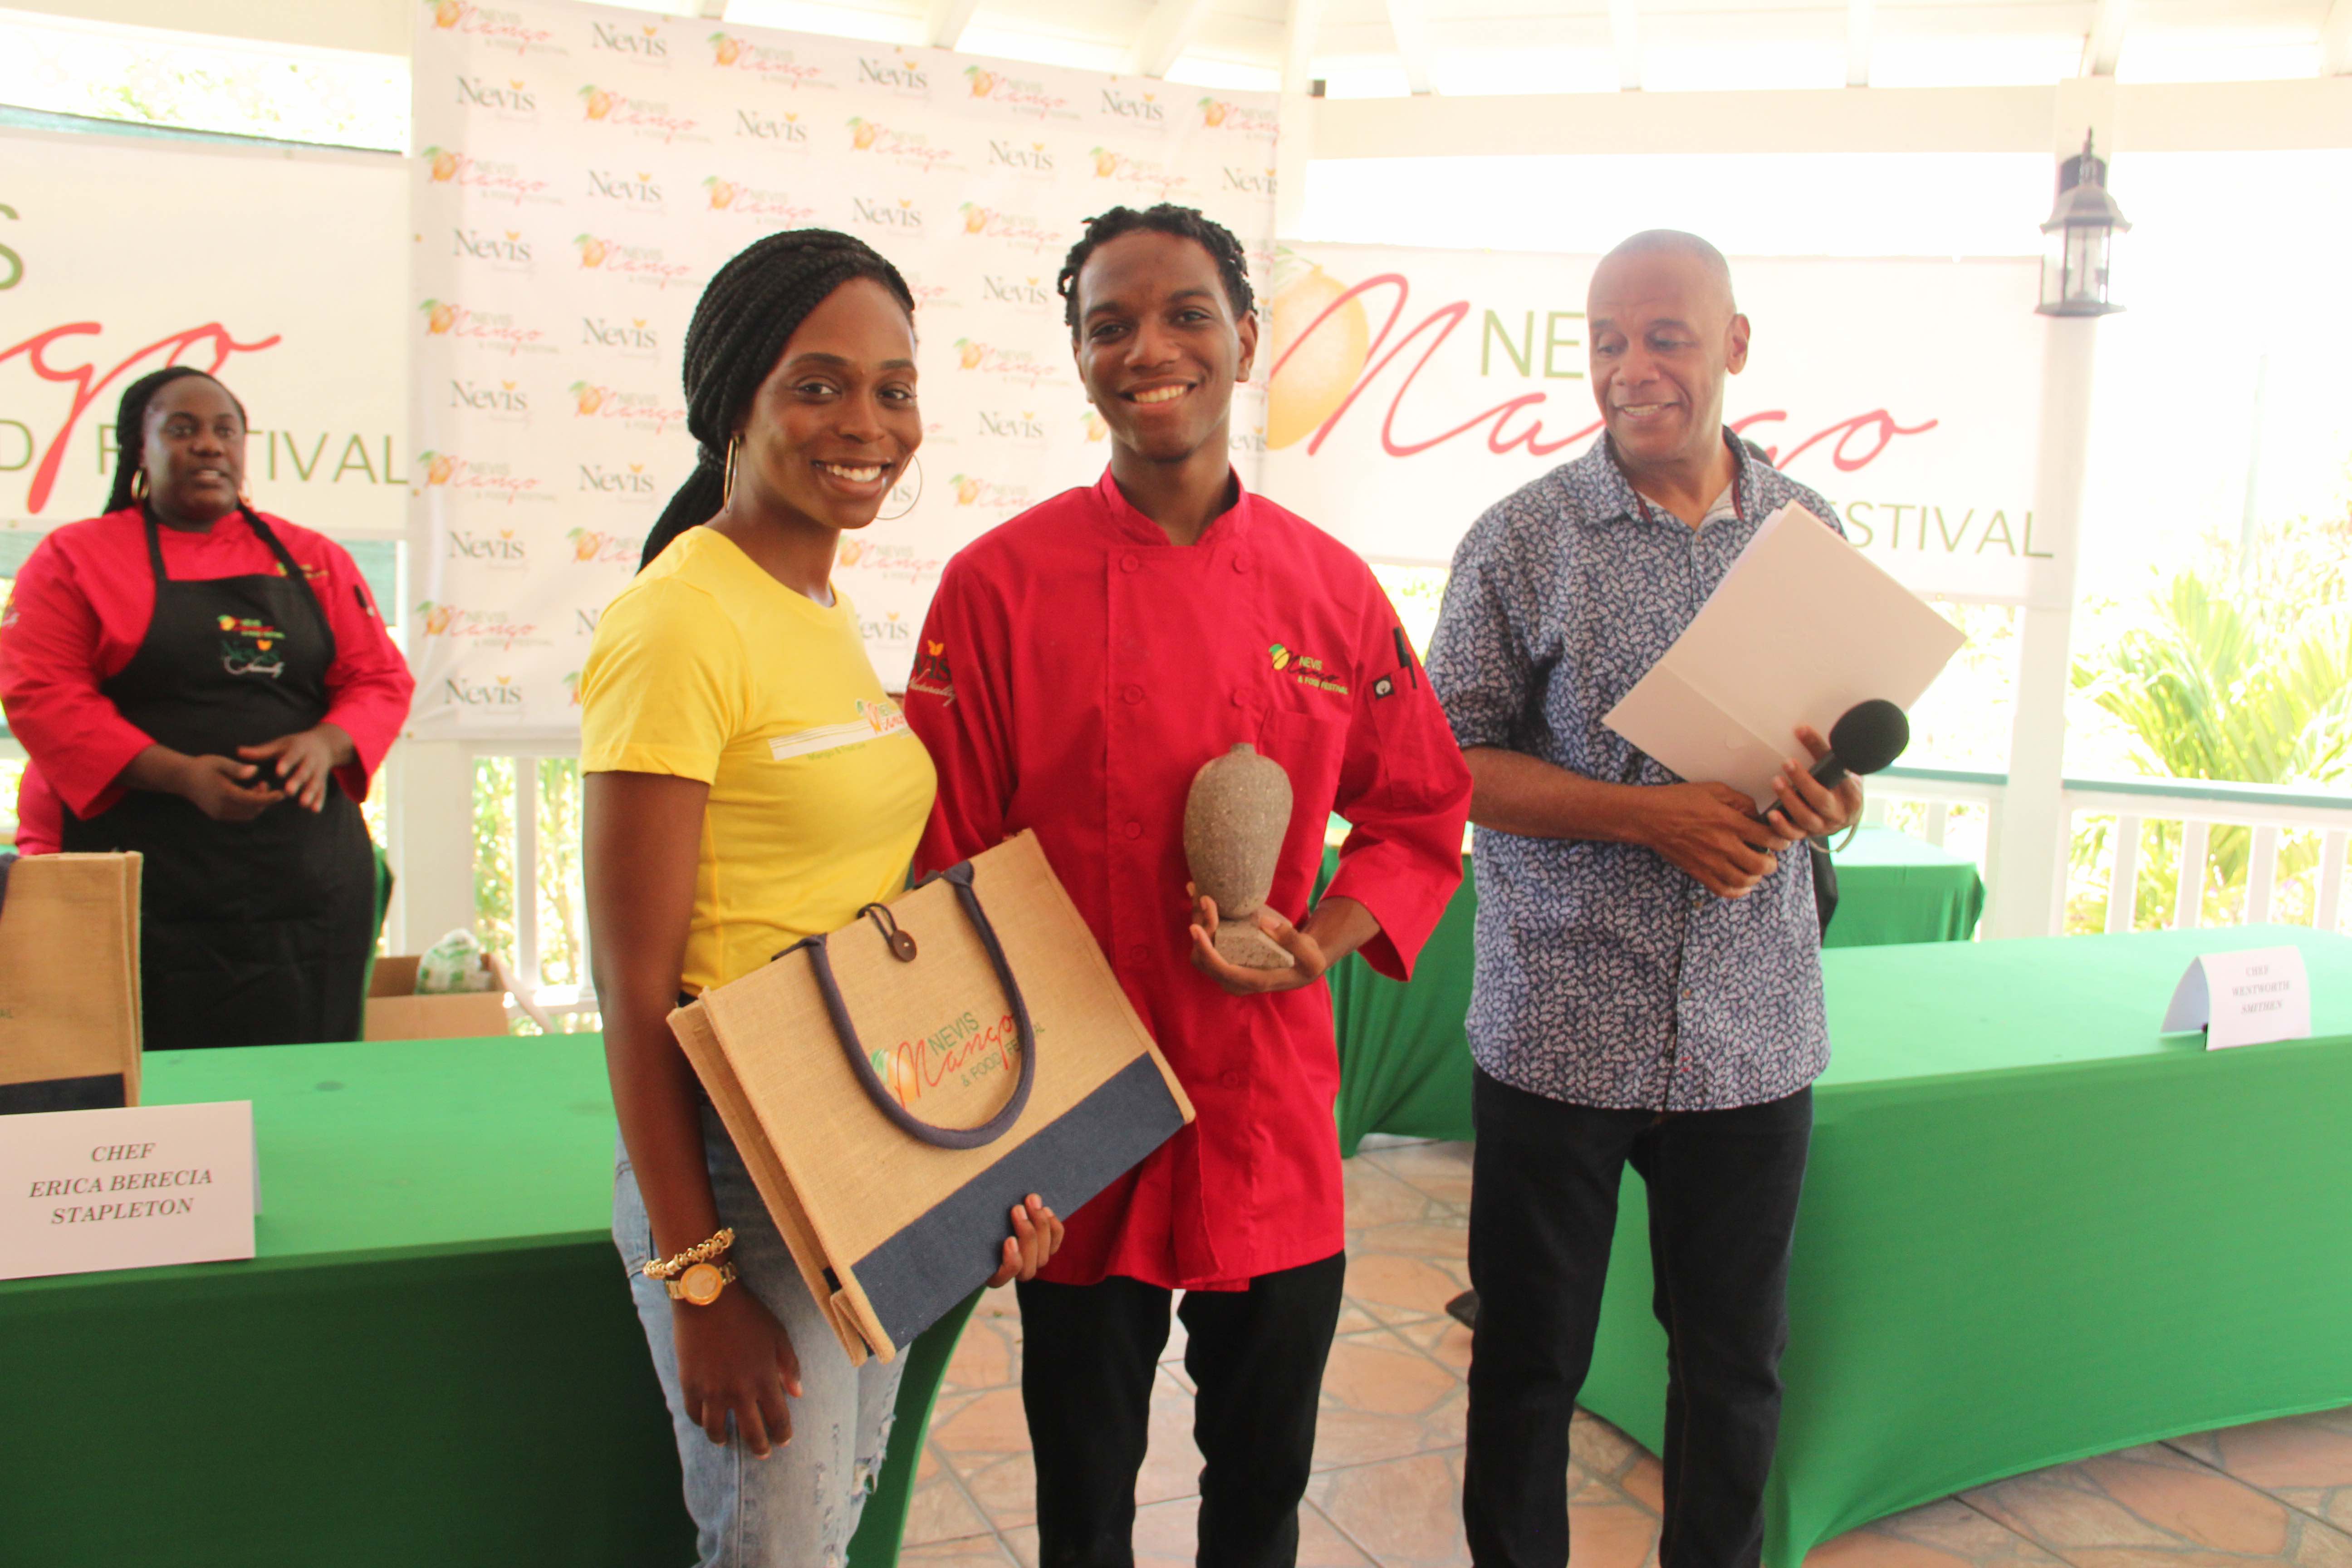 (l-R) Ms. Jadine Yarde, Chief Executive Officer at the Nevis Tourism Authority with Chef Wentworth Smithen, winner of the Cook-Off at the Nevis Mango and Food Festival hosted by the Nevis Tourism Authority at Cleveland Gardens on July 04, 2020. Hon. Eric Evelyn, who served as the master of ceremony, and runner-up chef and culinary artist Erika Stapleton look on